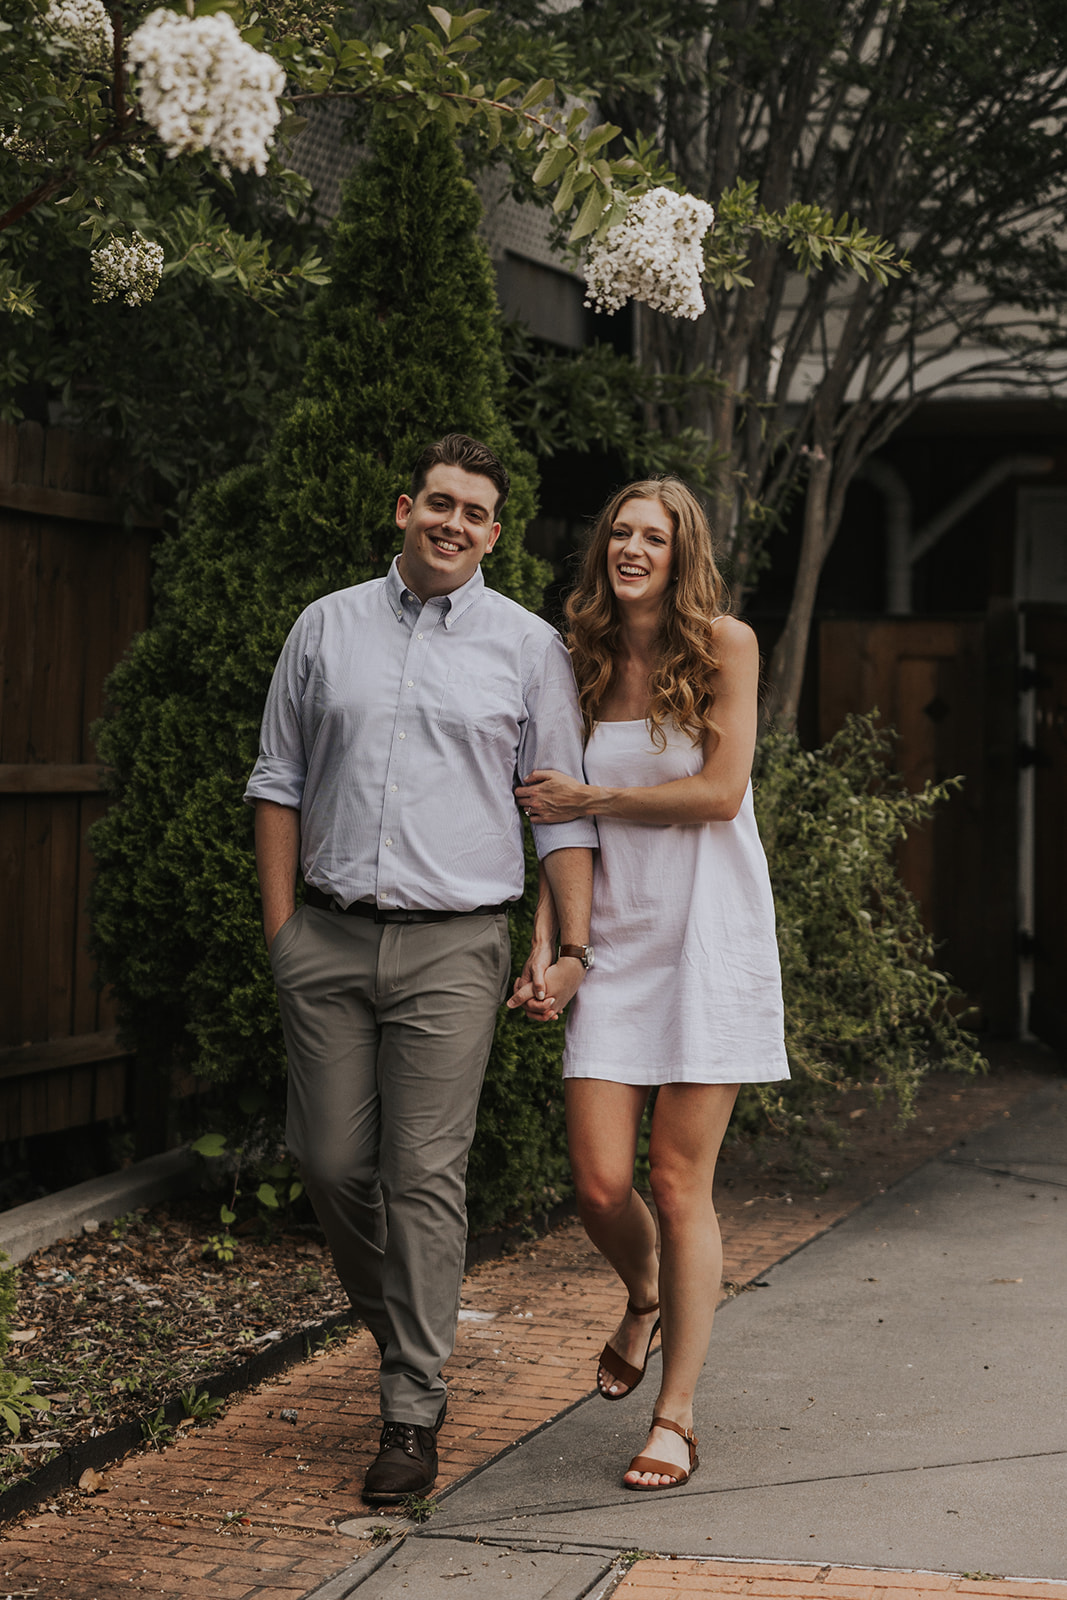 Stunning couple walk together in front of a simple wooden fence.